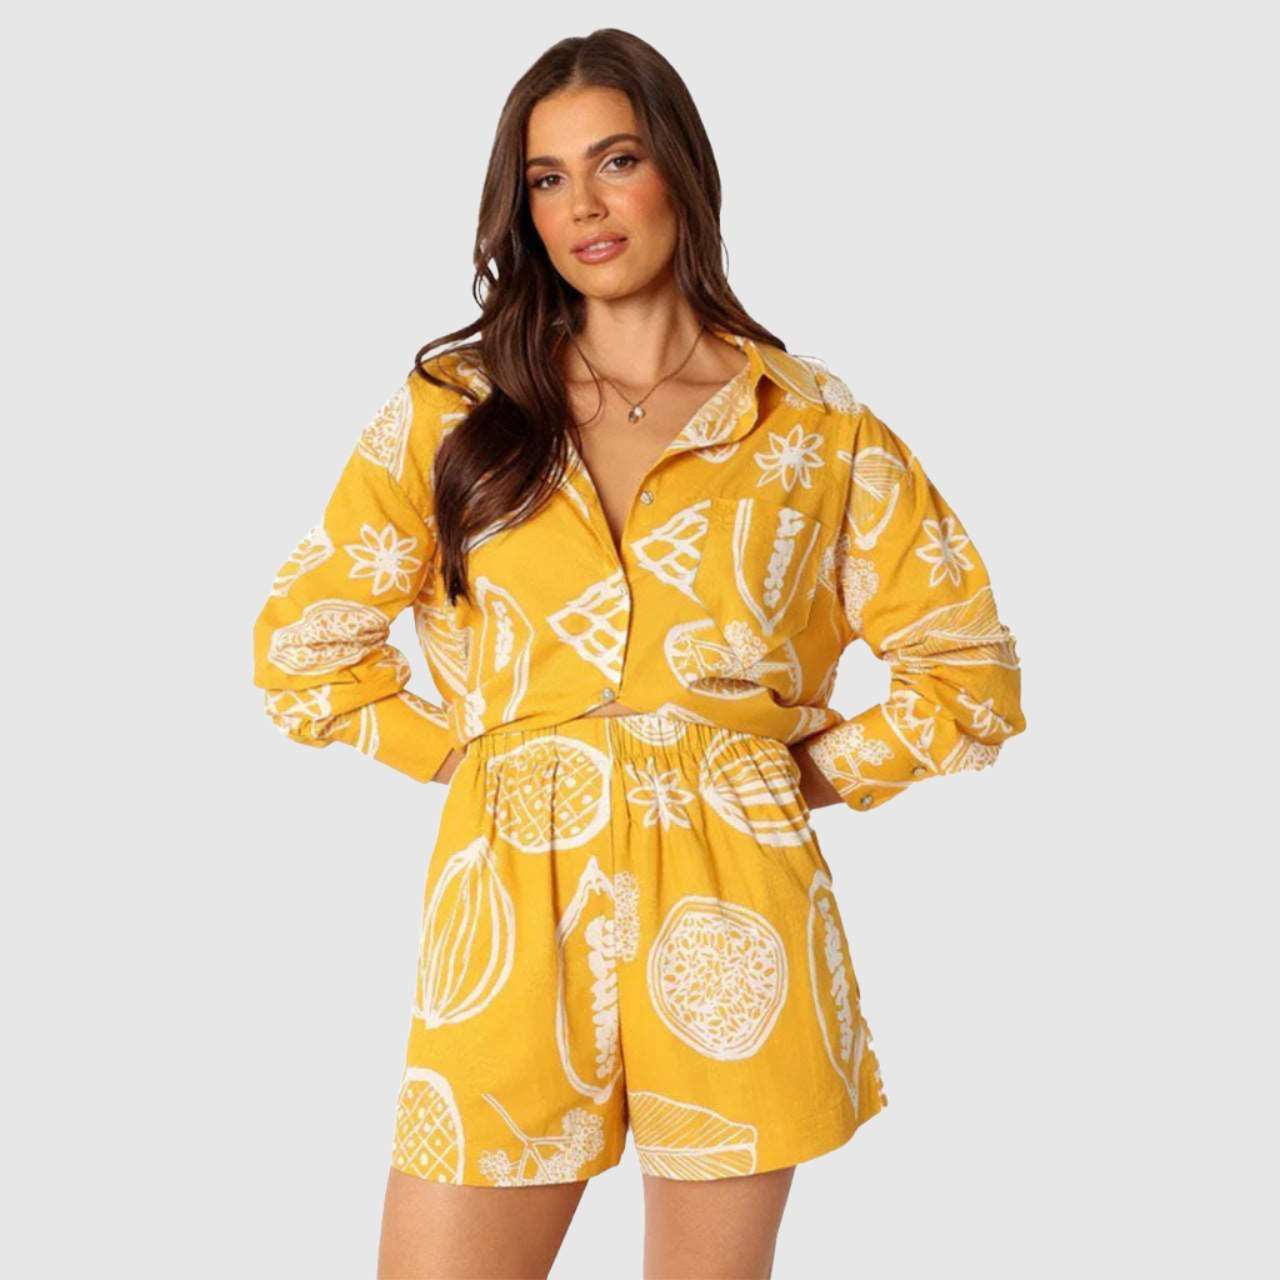 Women's Casual Fruit Printed Short Sleeved Shirt and Shorts Outfit Set